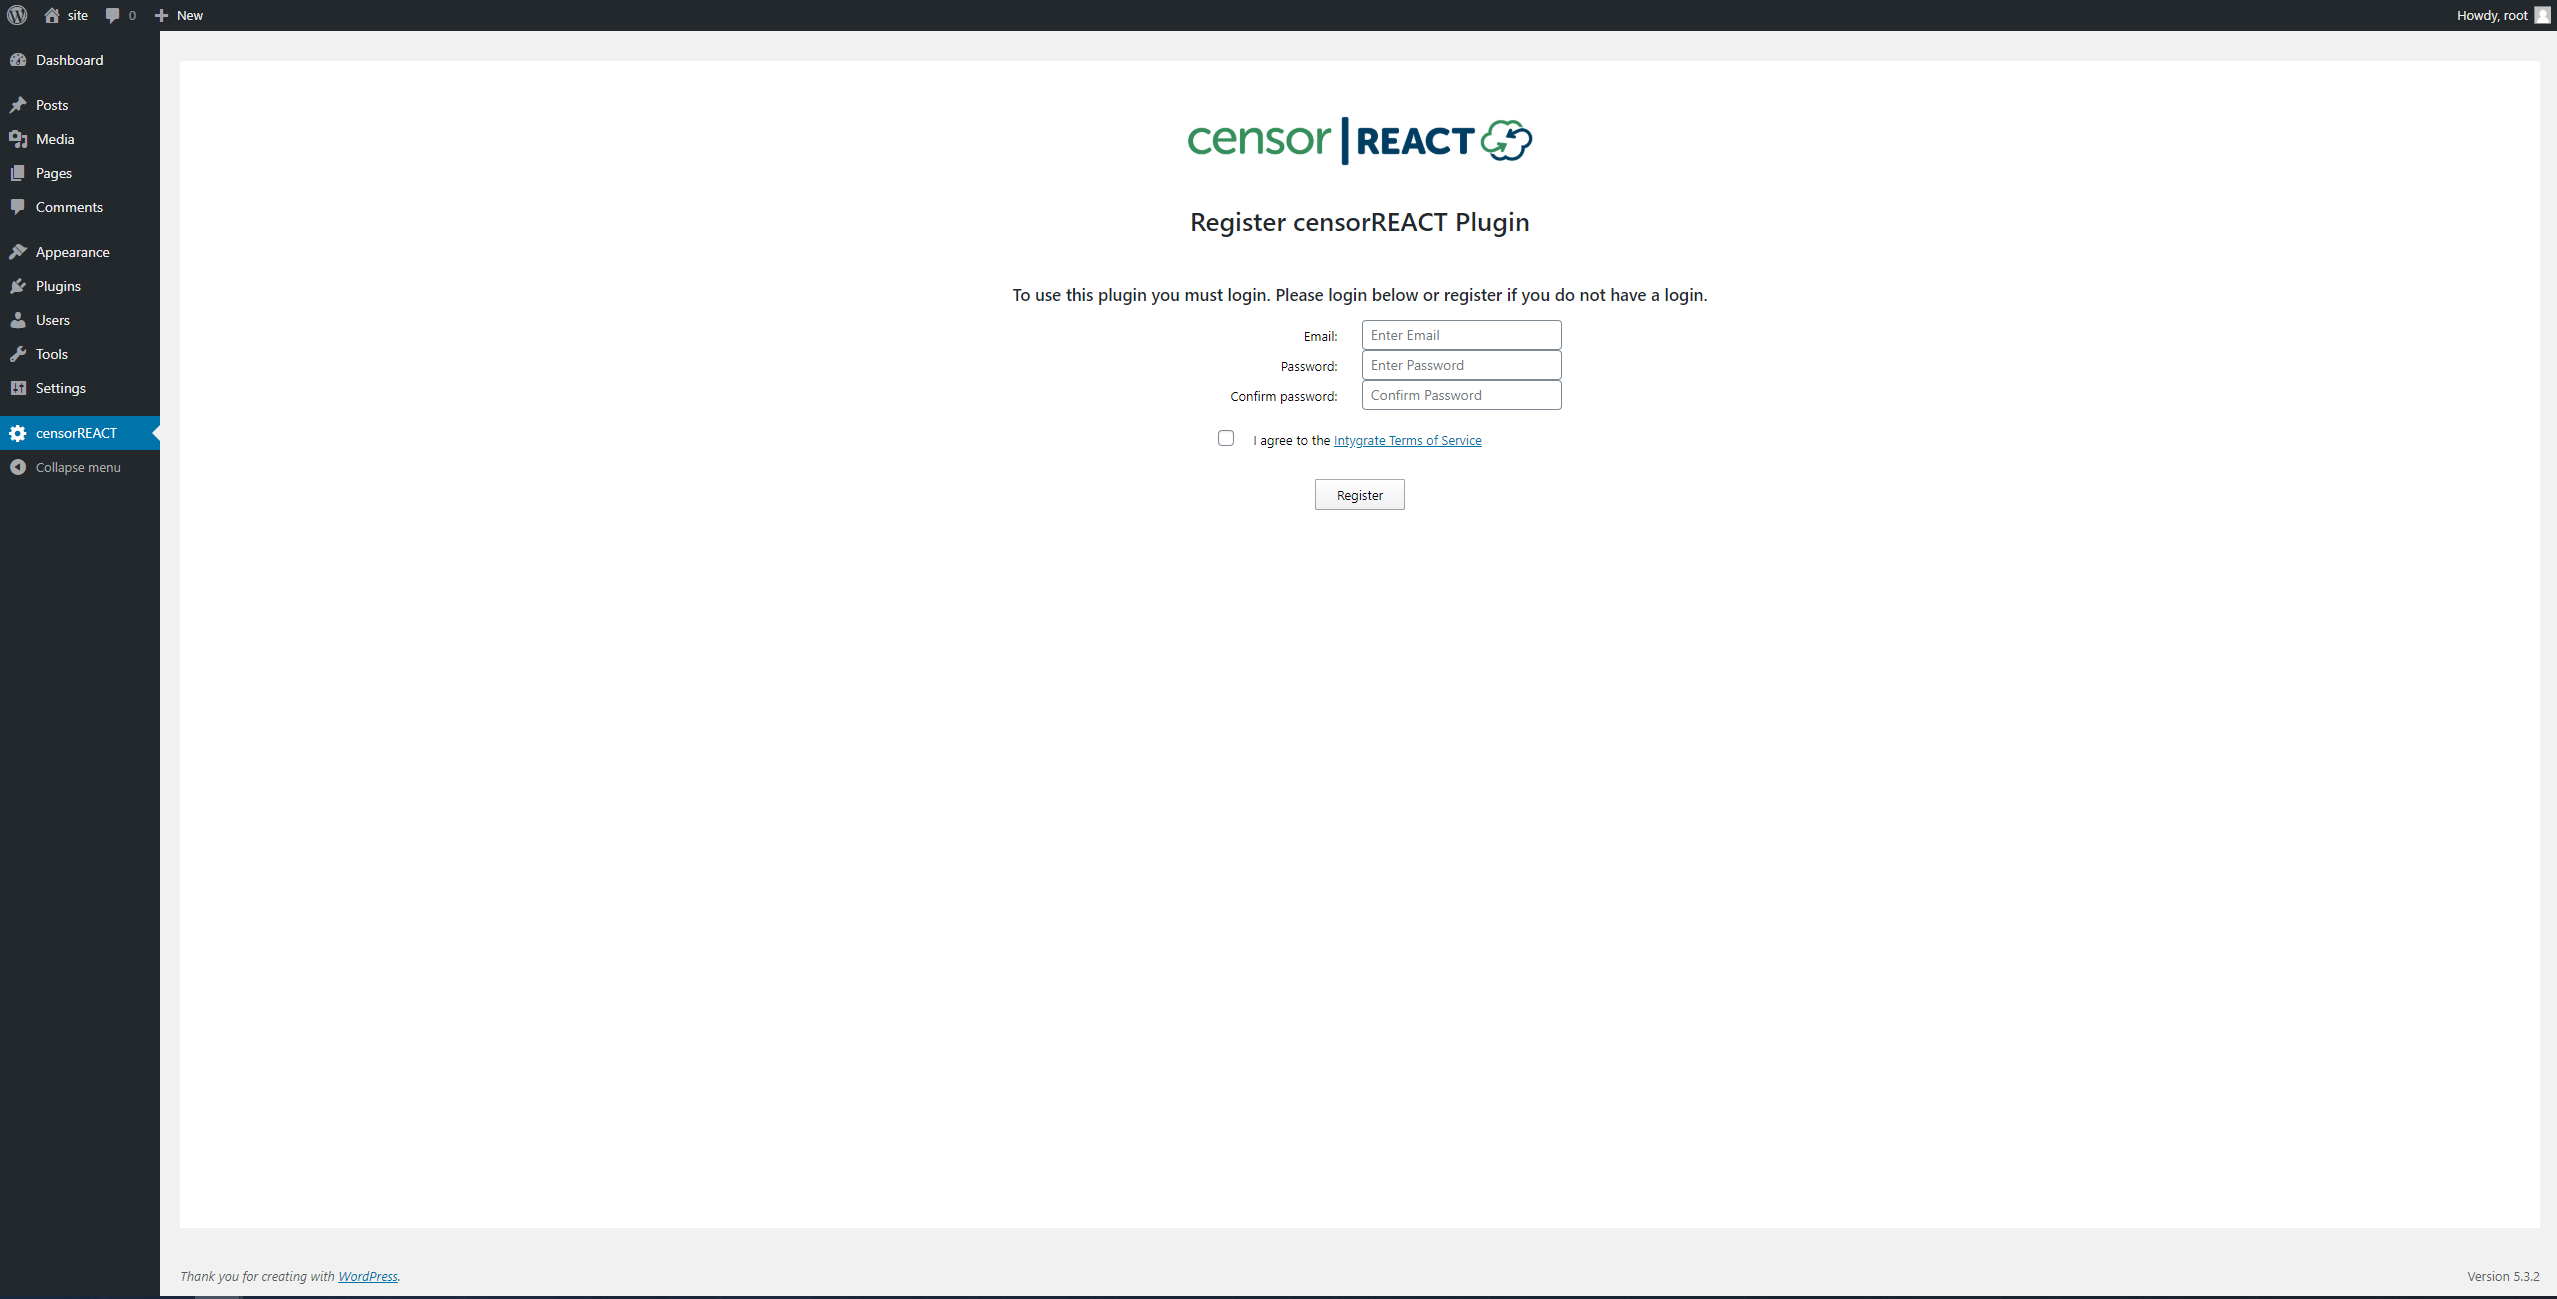 Sign up or login in our censorREACT settings page to get started.